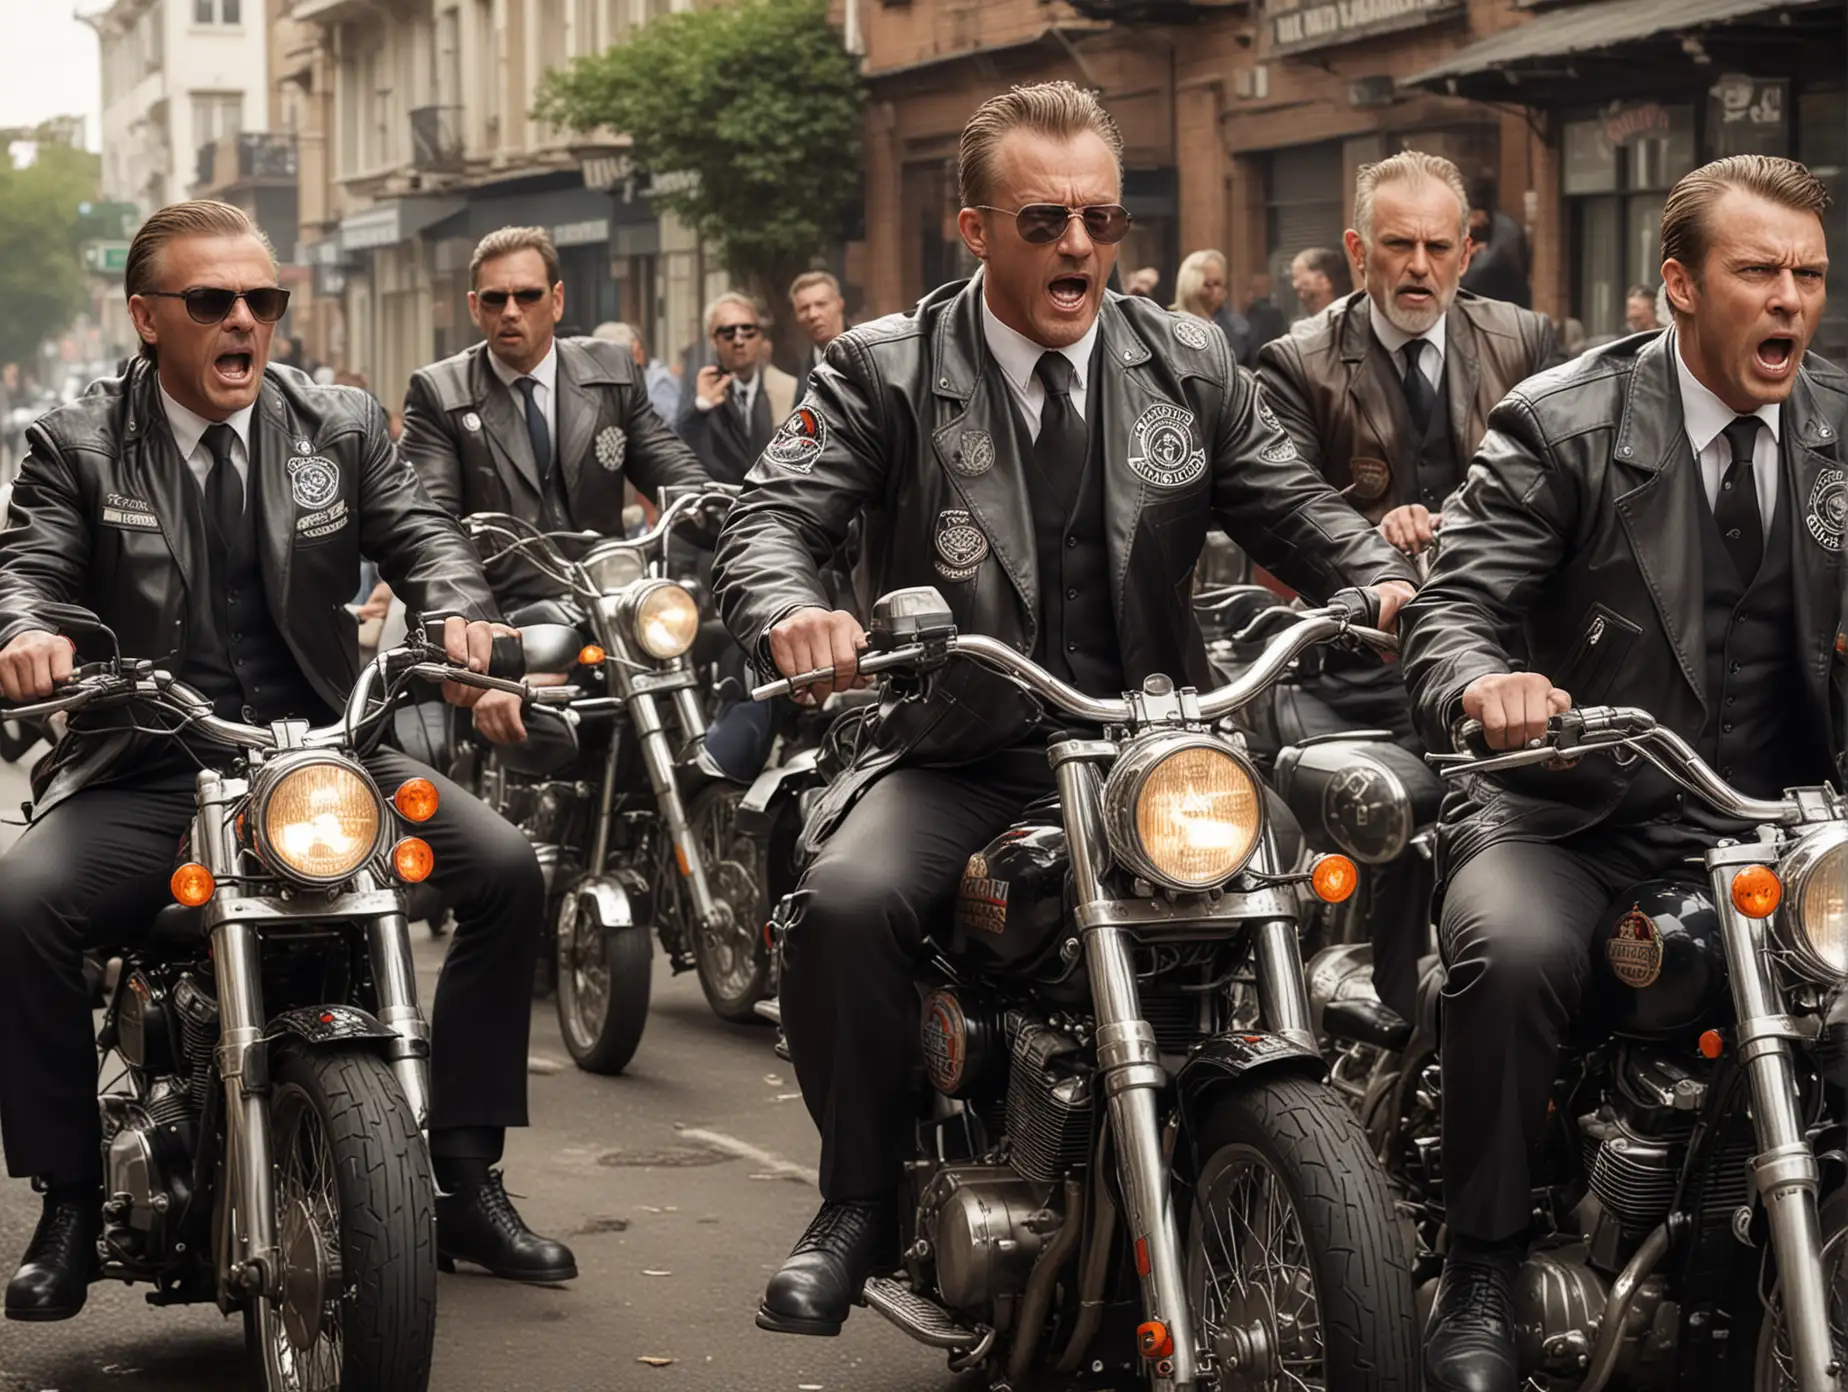 A group of angry middleaged male lawyers riding motorcycles. They are wearing suits and leather vests with club logos printed on them.